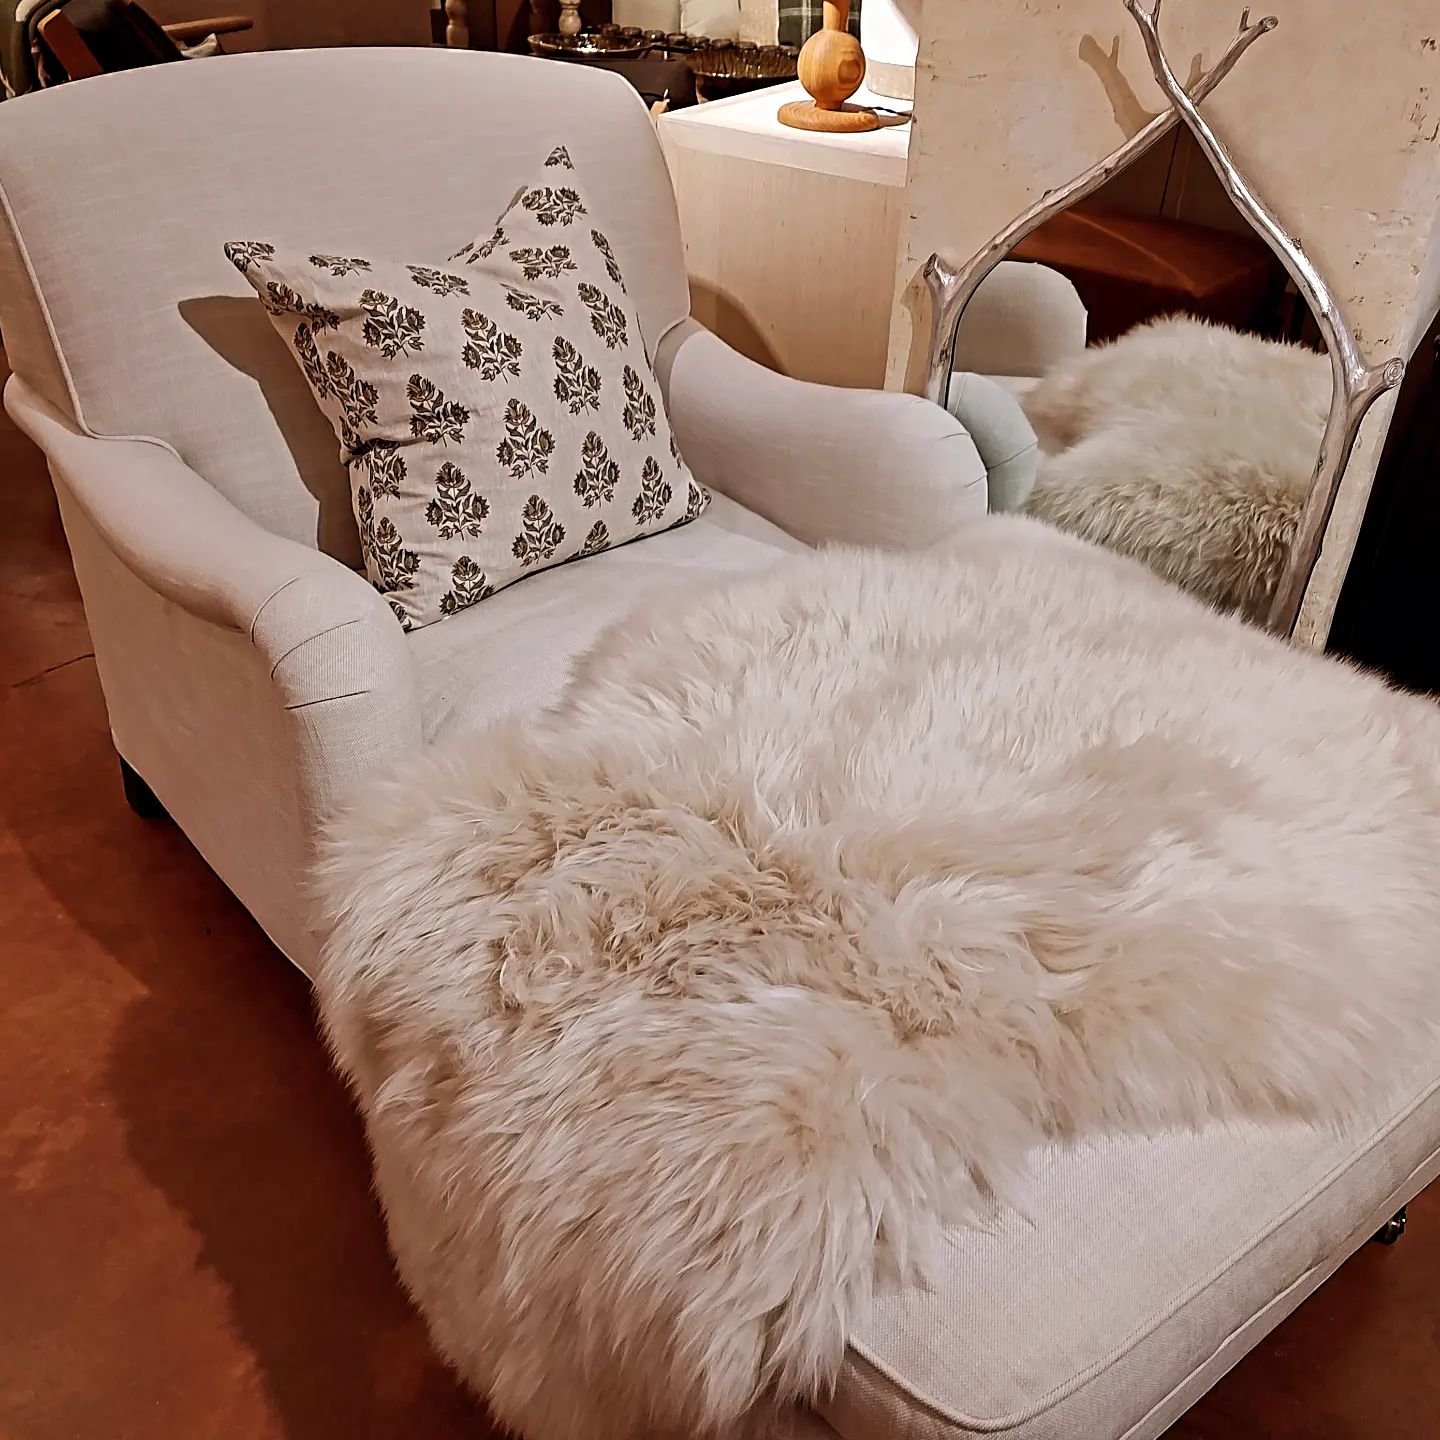 A chaise for Mama?  Great place for Mom to relax, read and enjoy her morning coffee!  #mothersday #immediatedelivery #loveyourmom #performancefabric #easycare #linen #openeveryday #38years #newprestonct #explorewashington #washingtonbusinessassociati